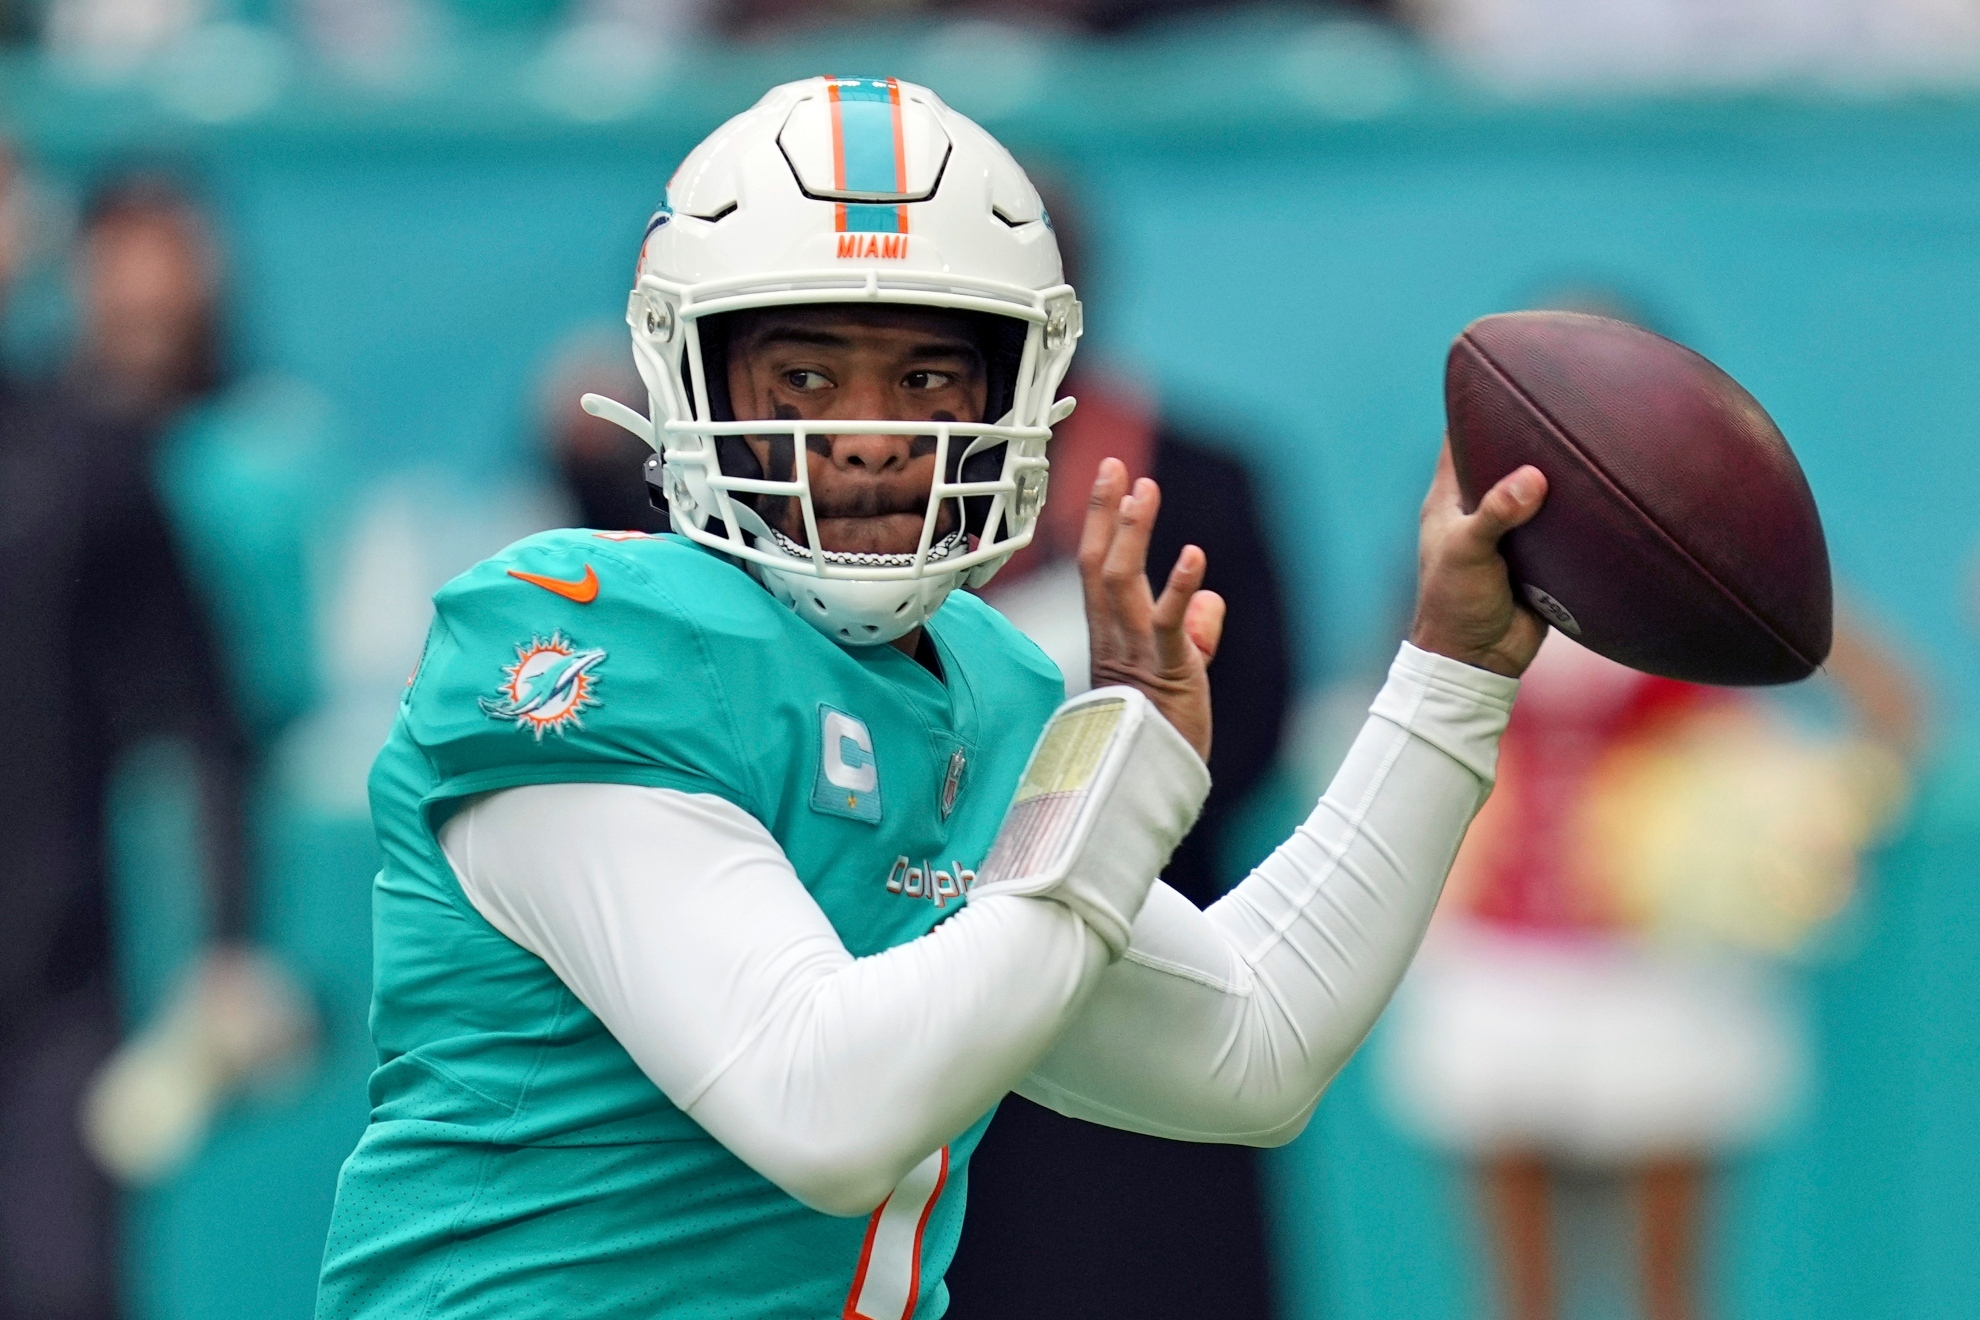 Fears over Tua Tagovailoa's health with the Miami Dolphins persist in a new  NFL season